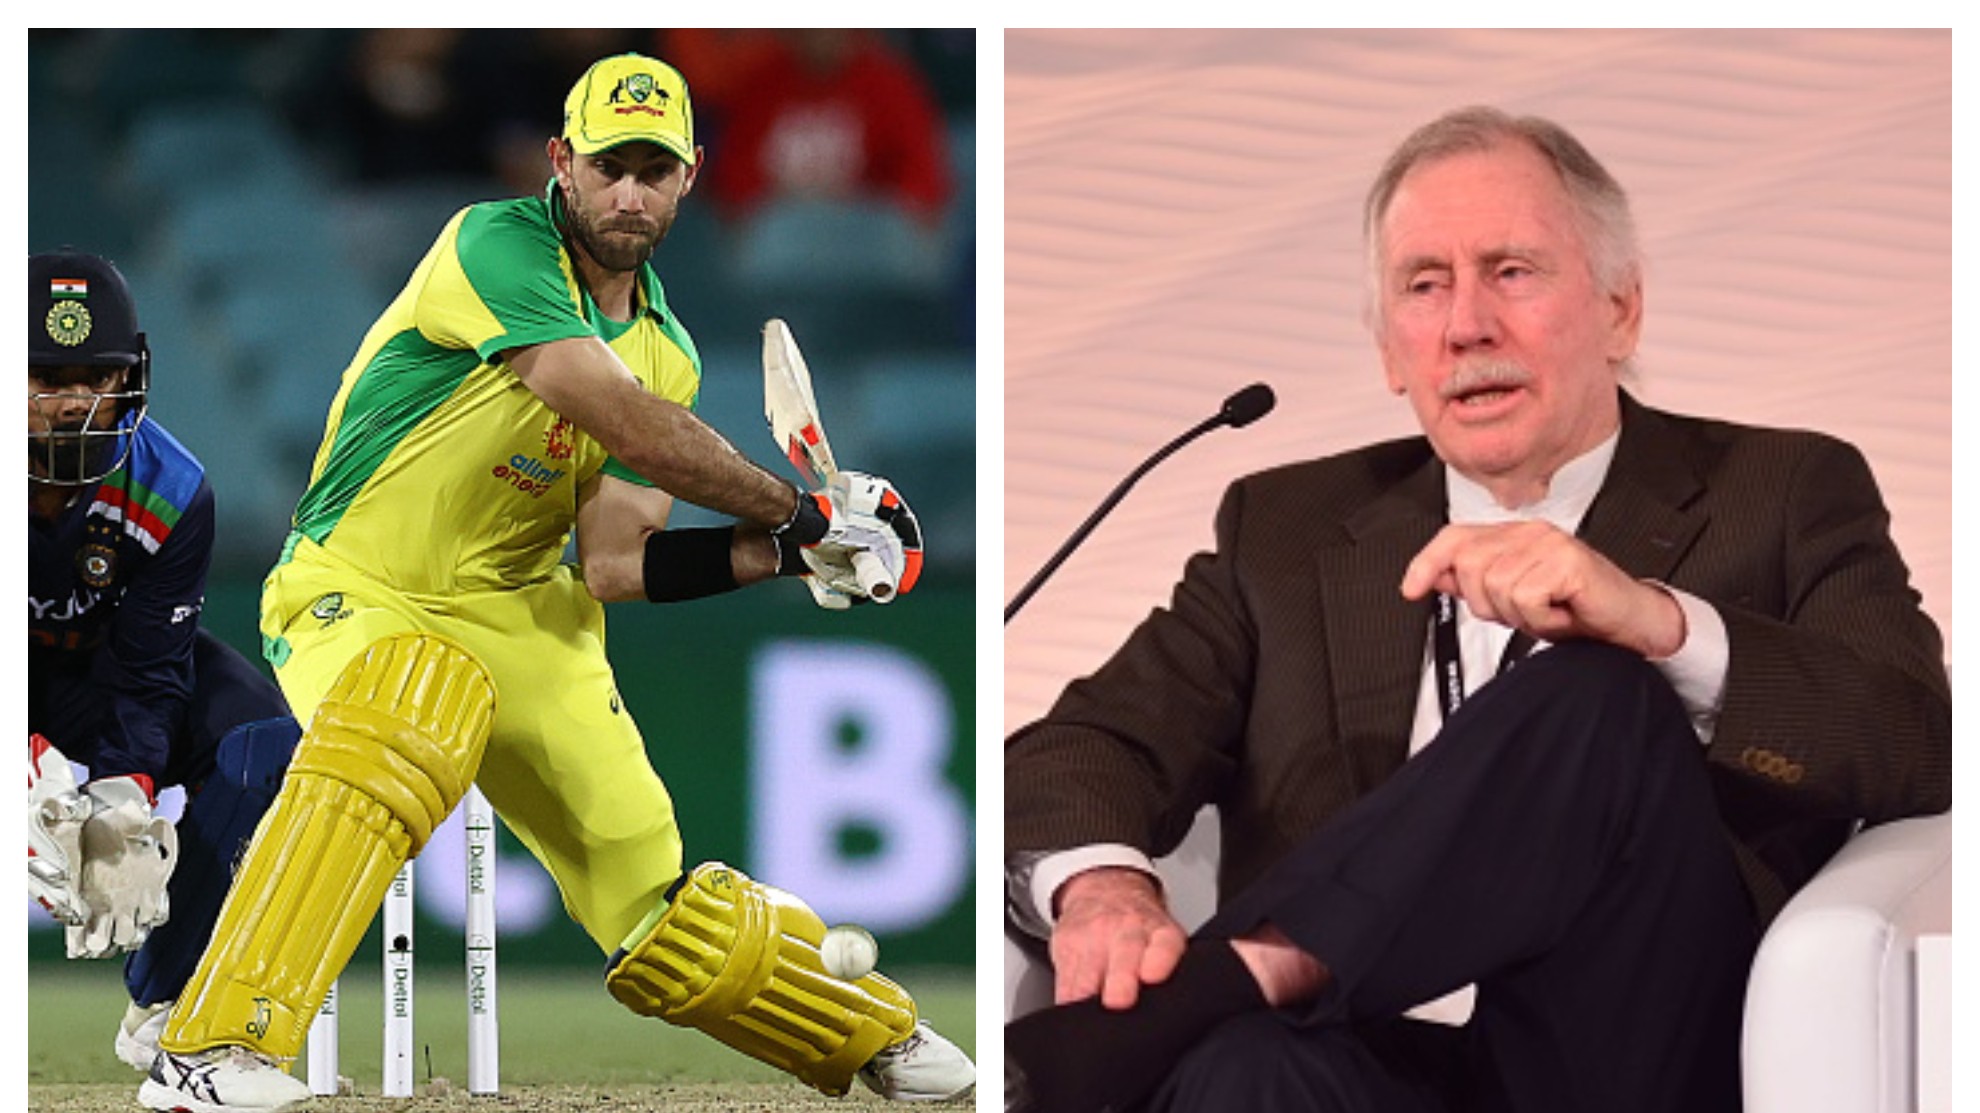 AUS v IND 2020-21: Ian Chappell says umpires should call 'dead ball' if batsman tries a switch-hit